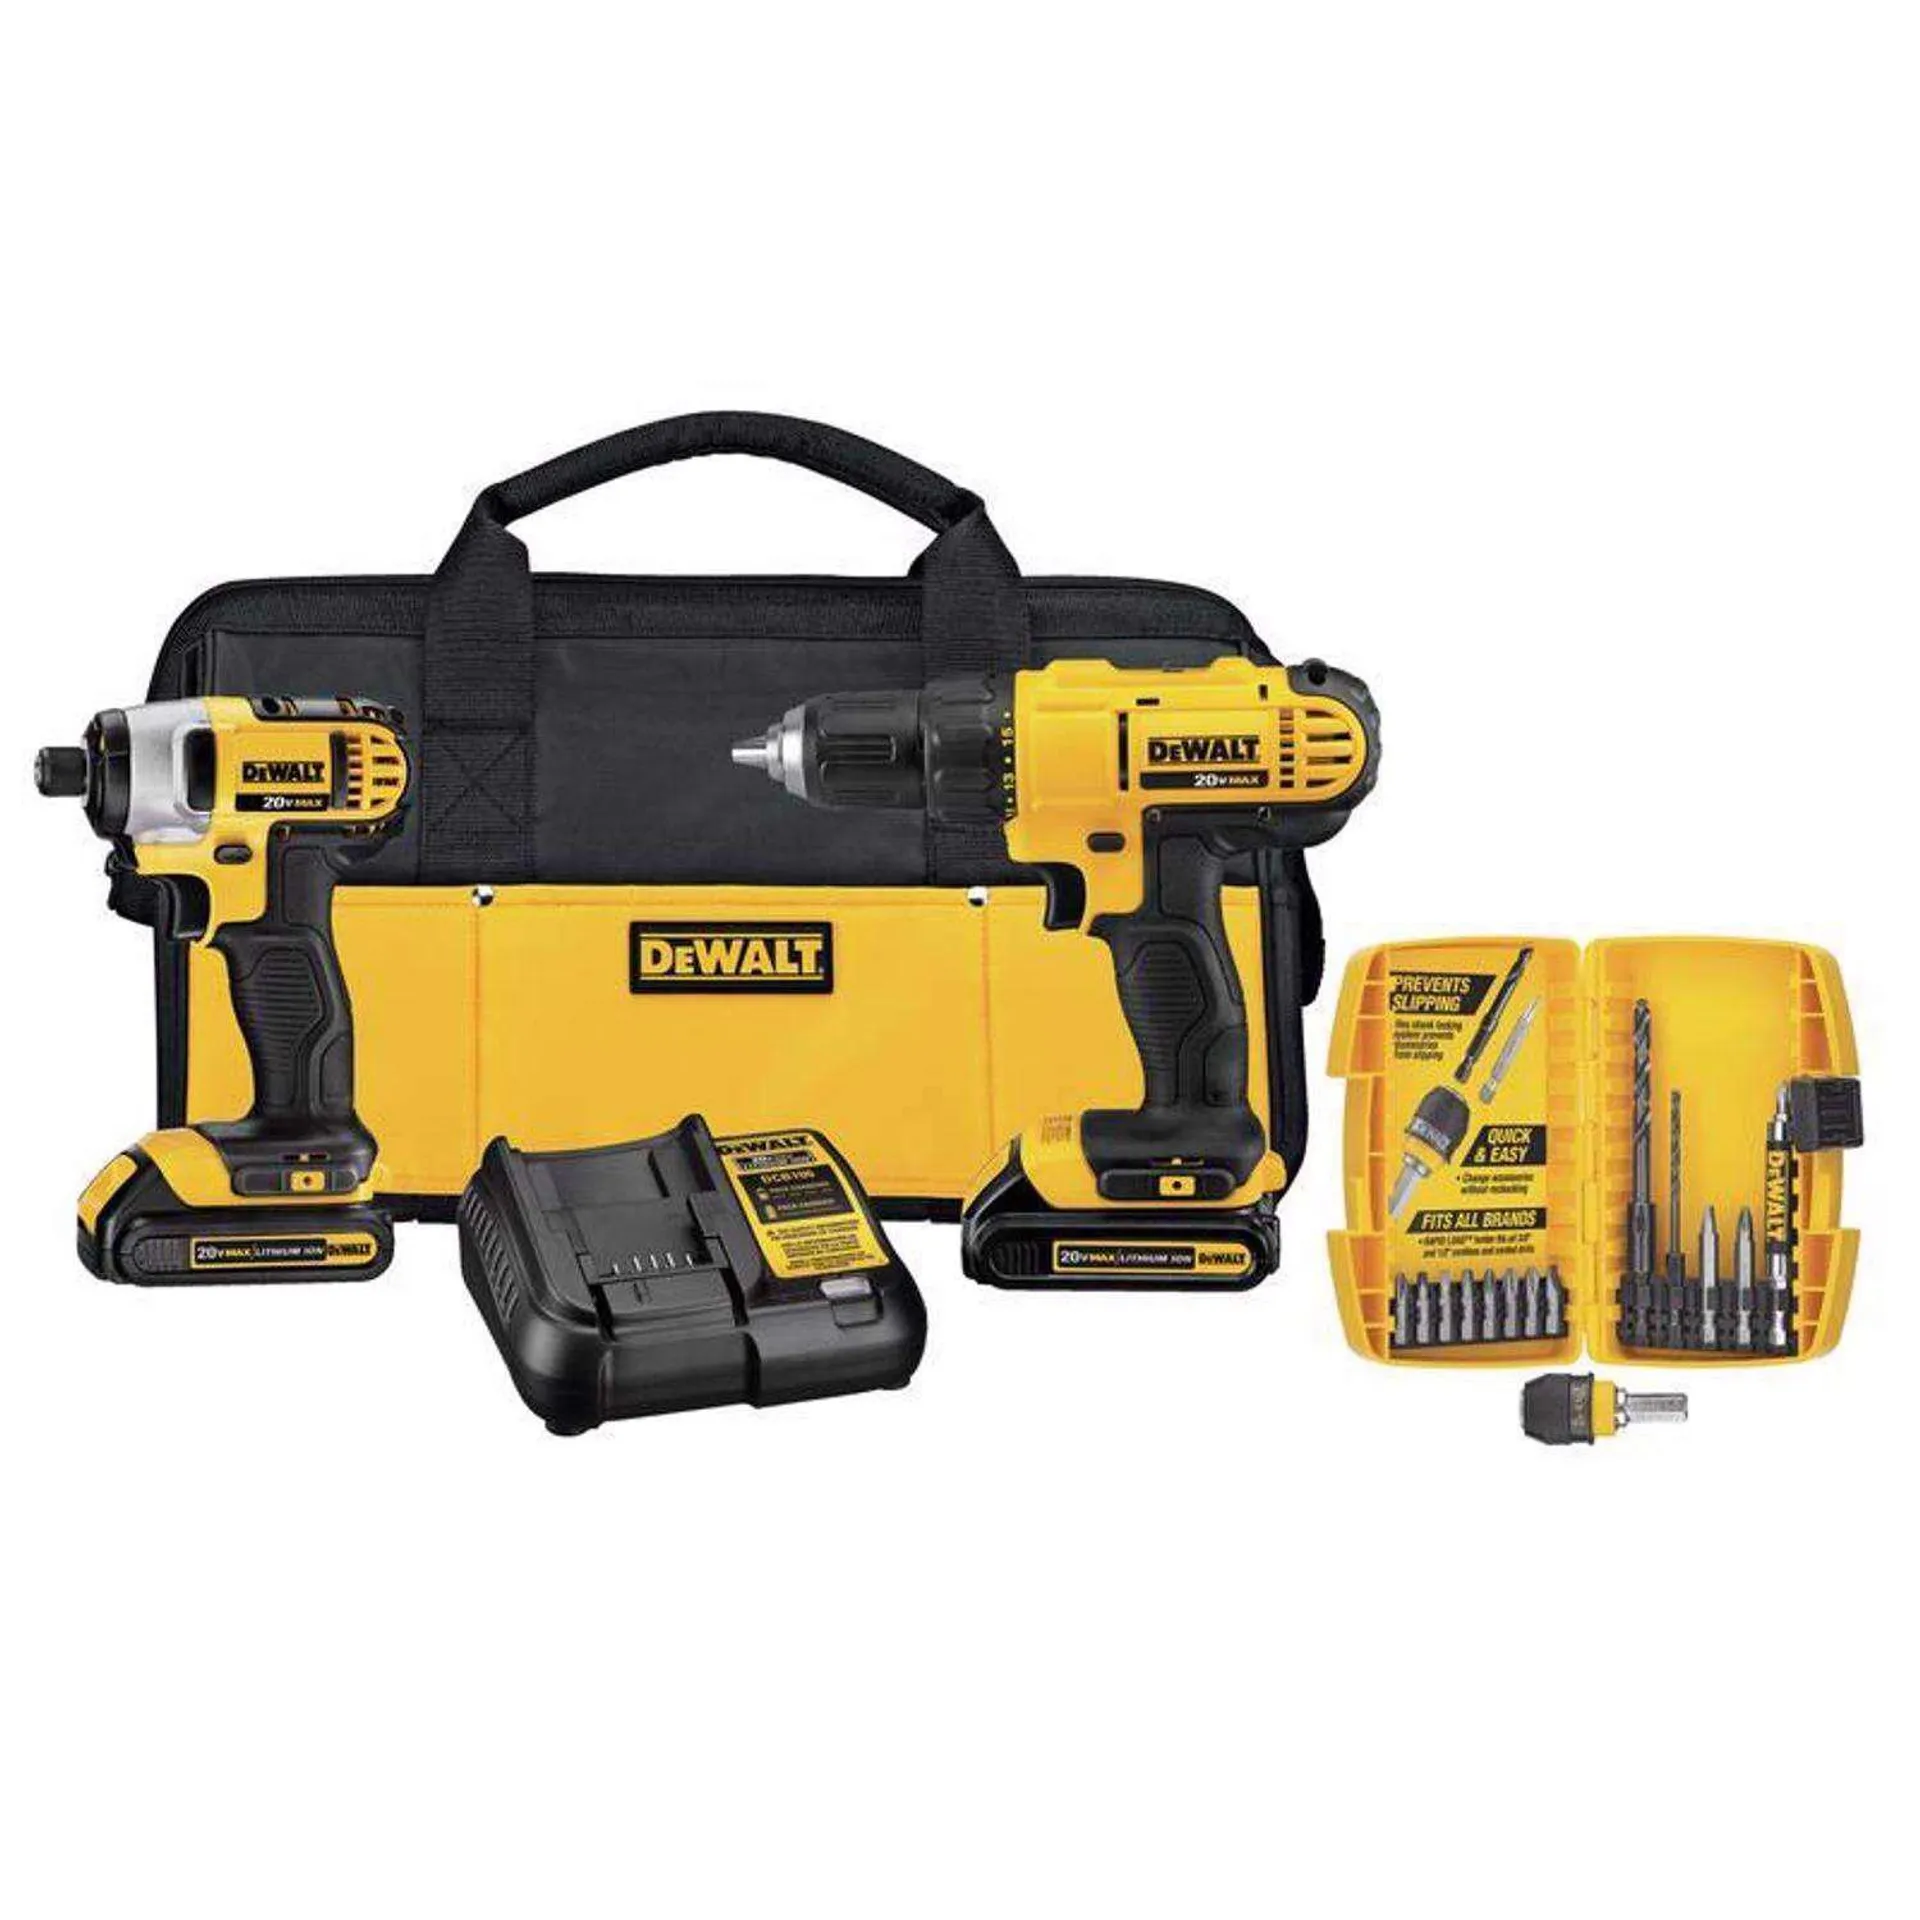 DEWALT 20V MAX Cordless Brushed 2 Tool Compact Drill and Impact Driver Kit